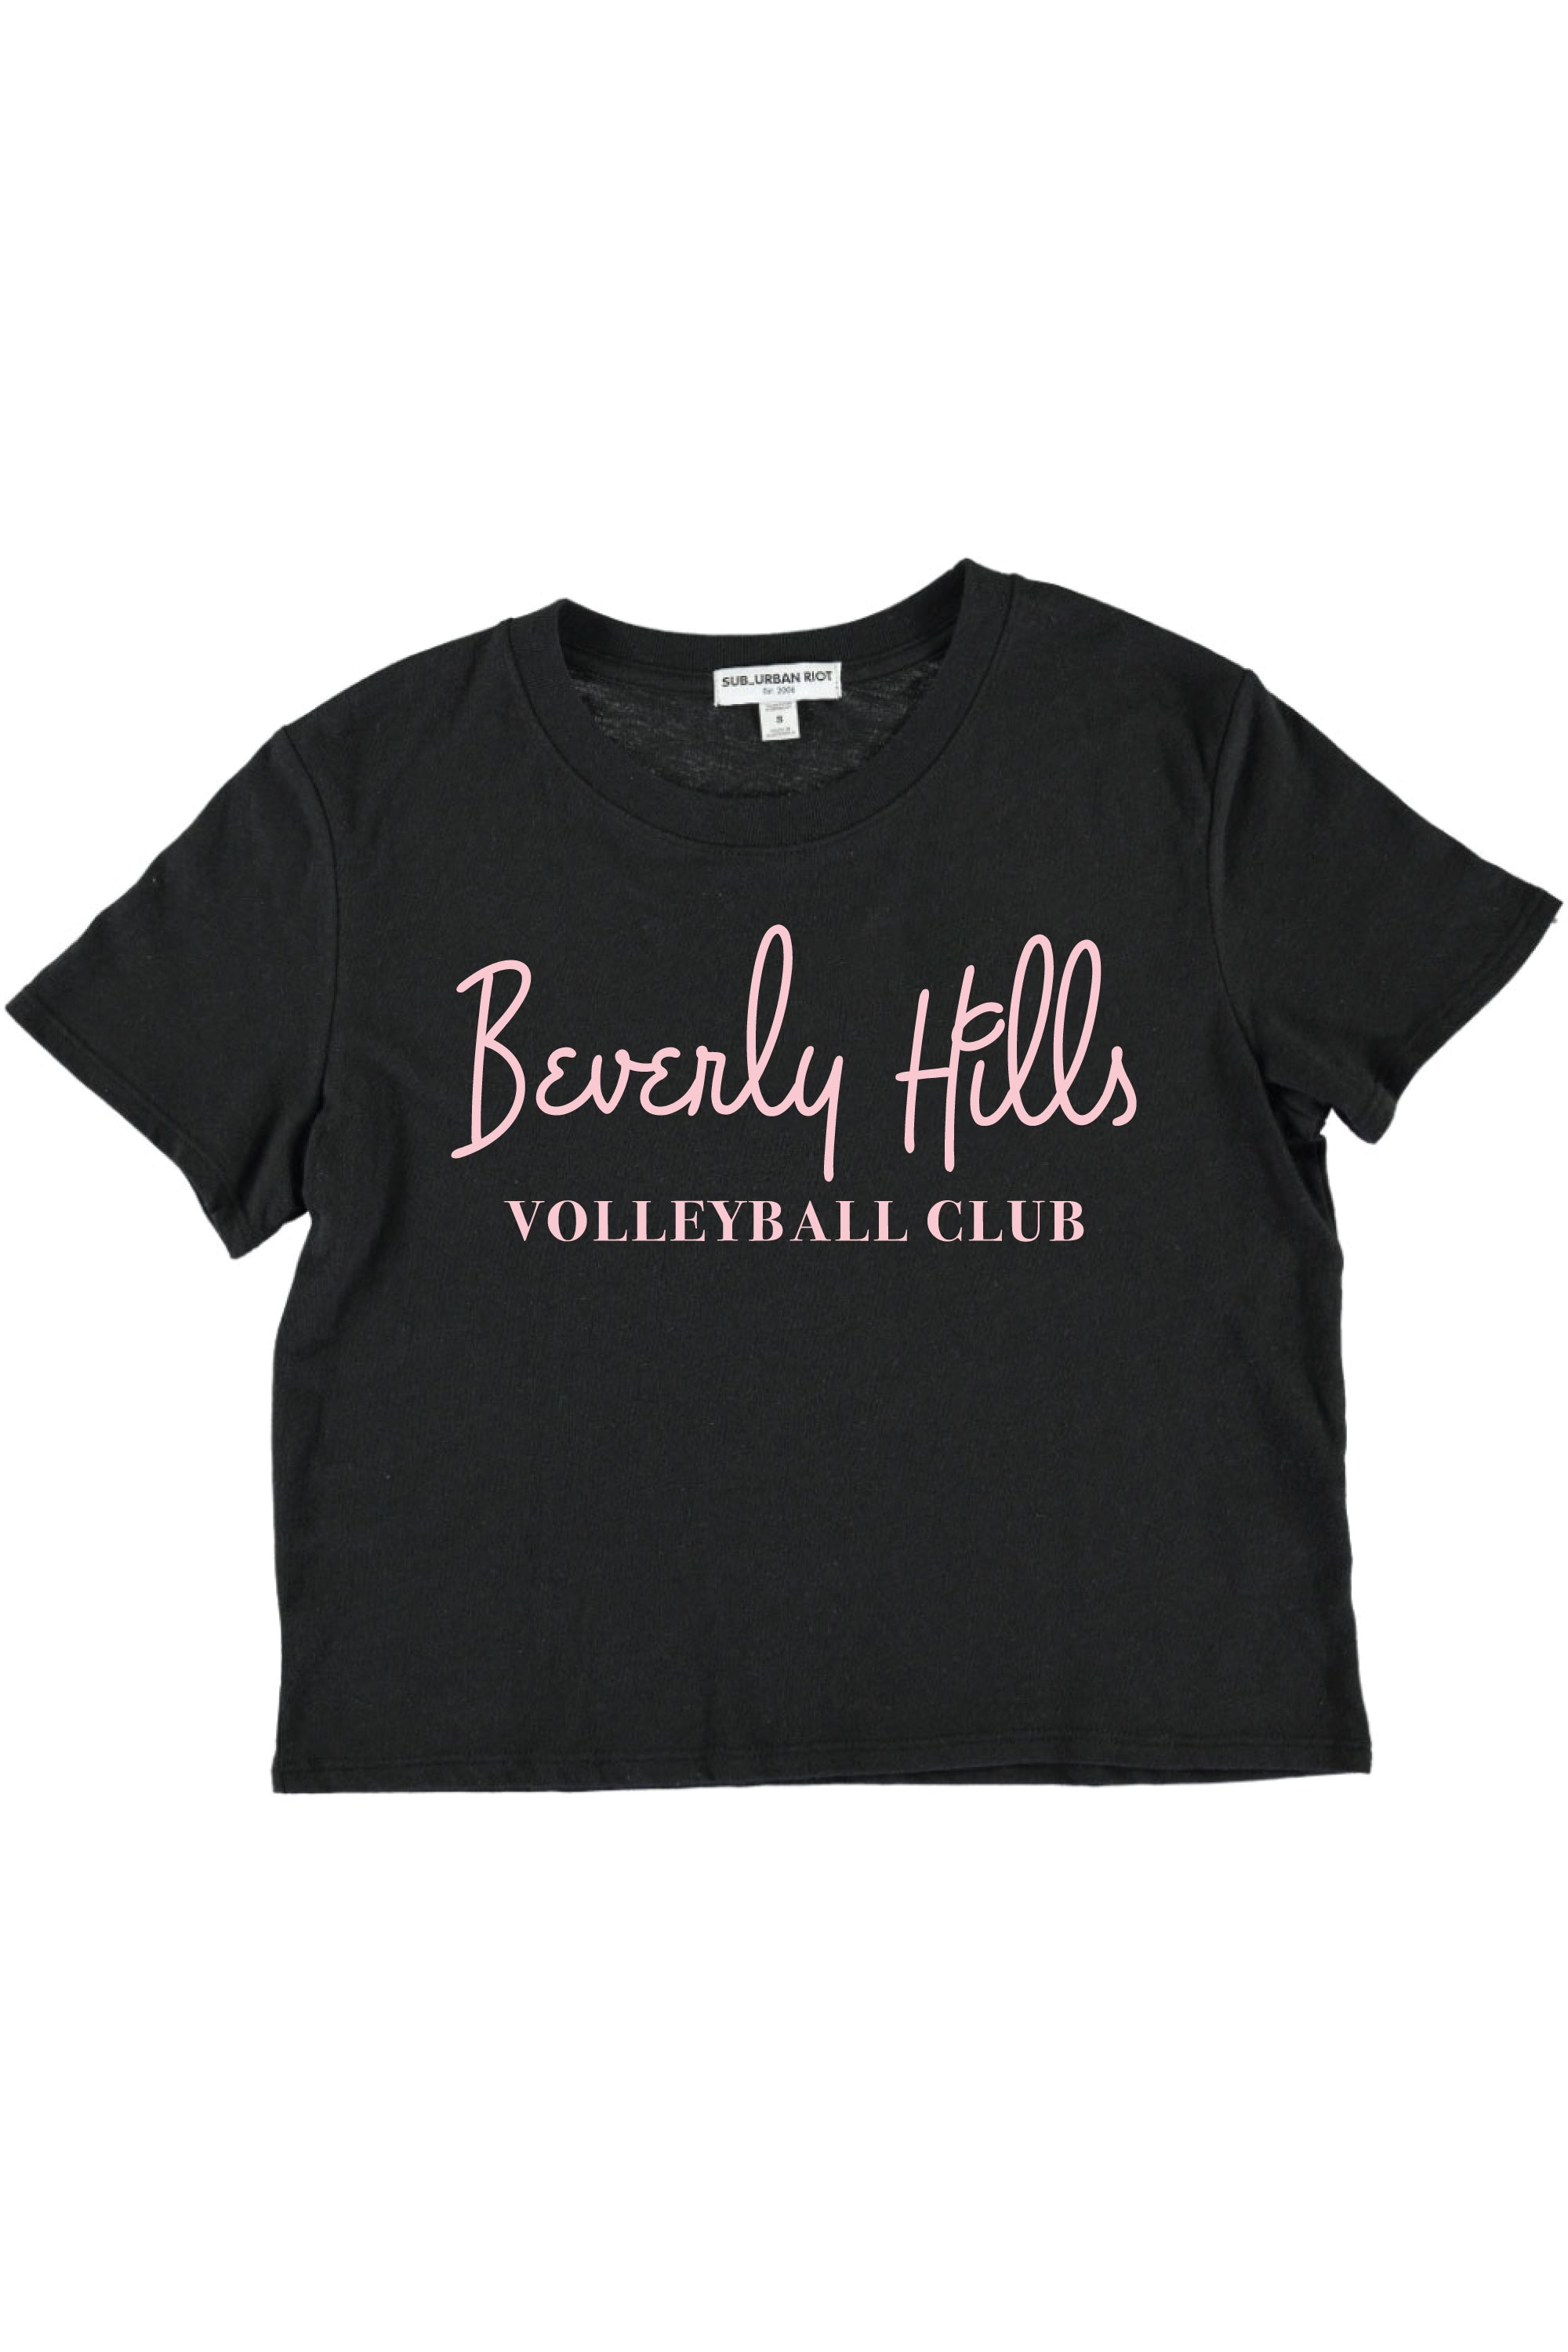 BEVERLY HILLS VOLLEYBALL YOUTH SIZE CROP TEE